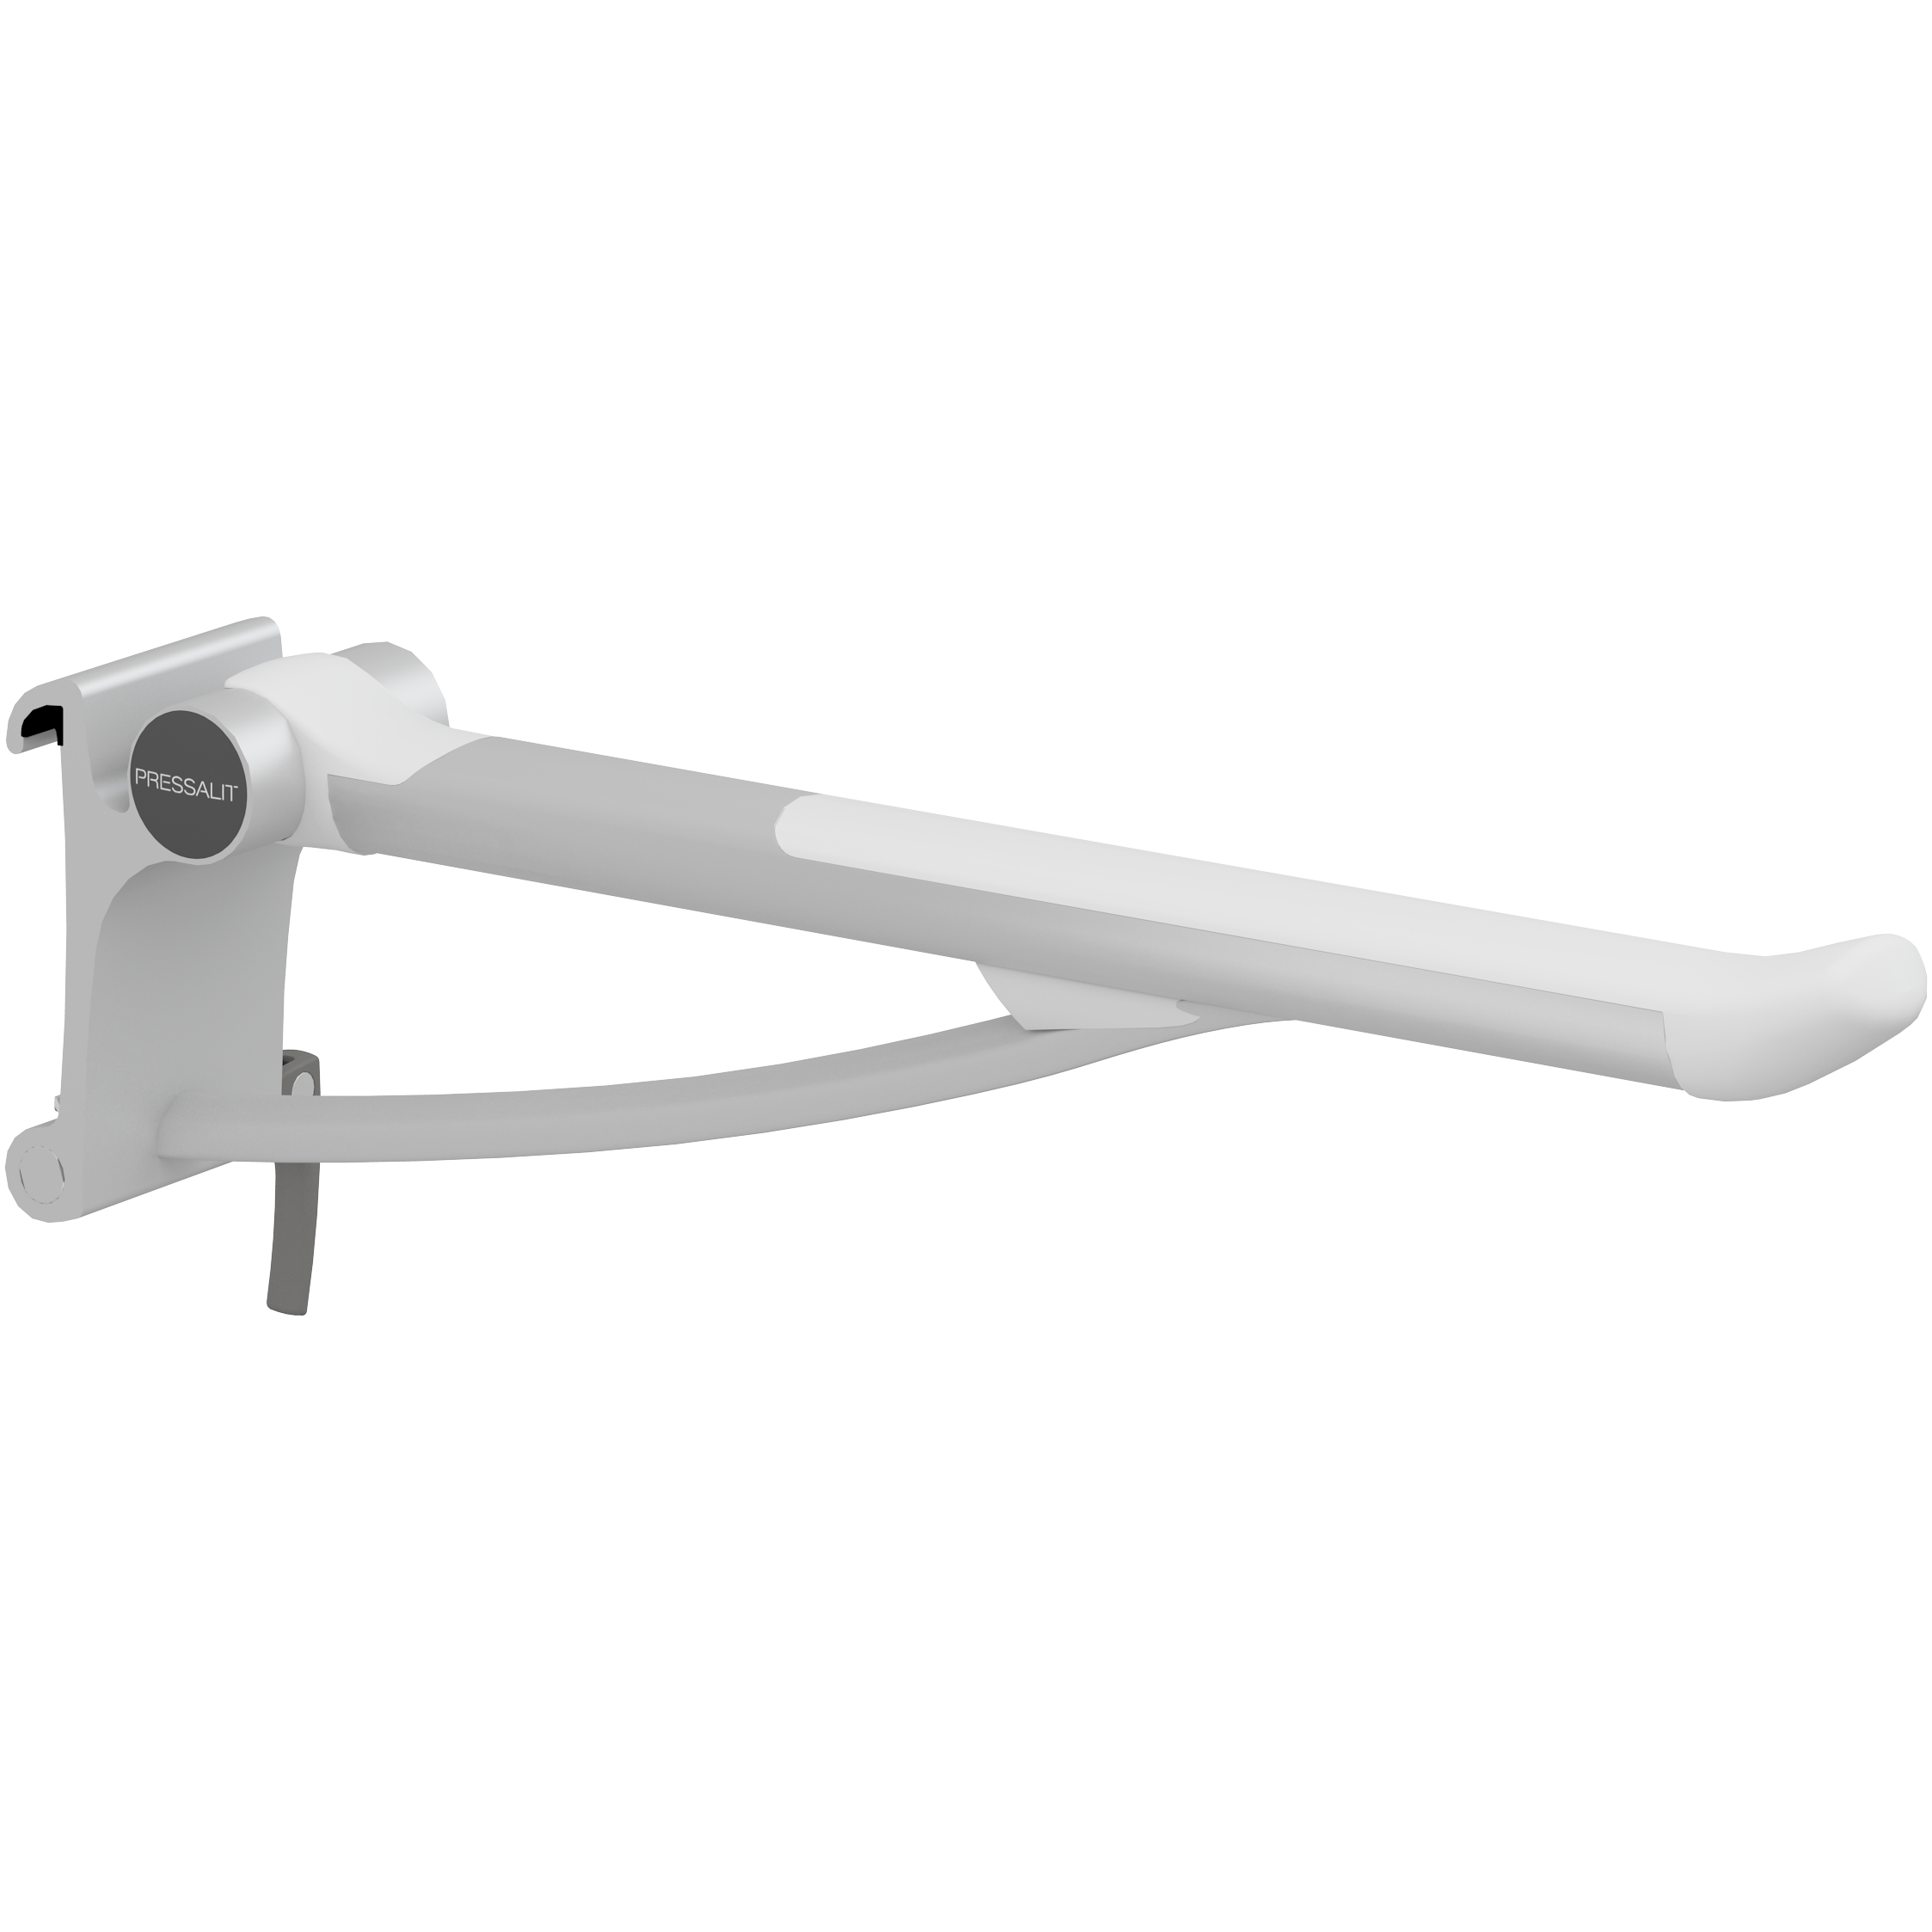 PLUS support arm, 700 mm